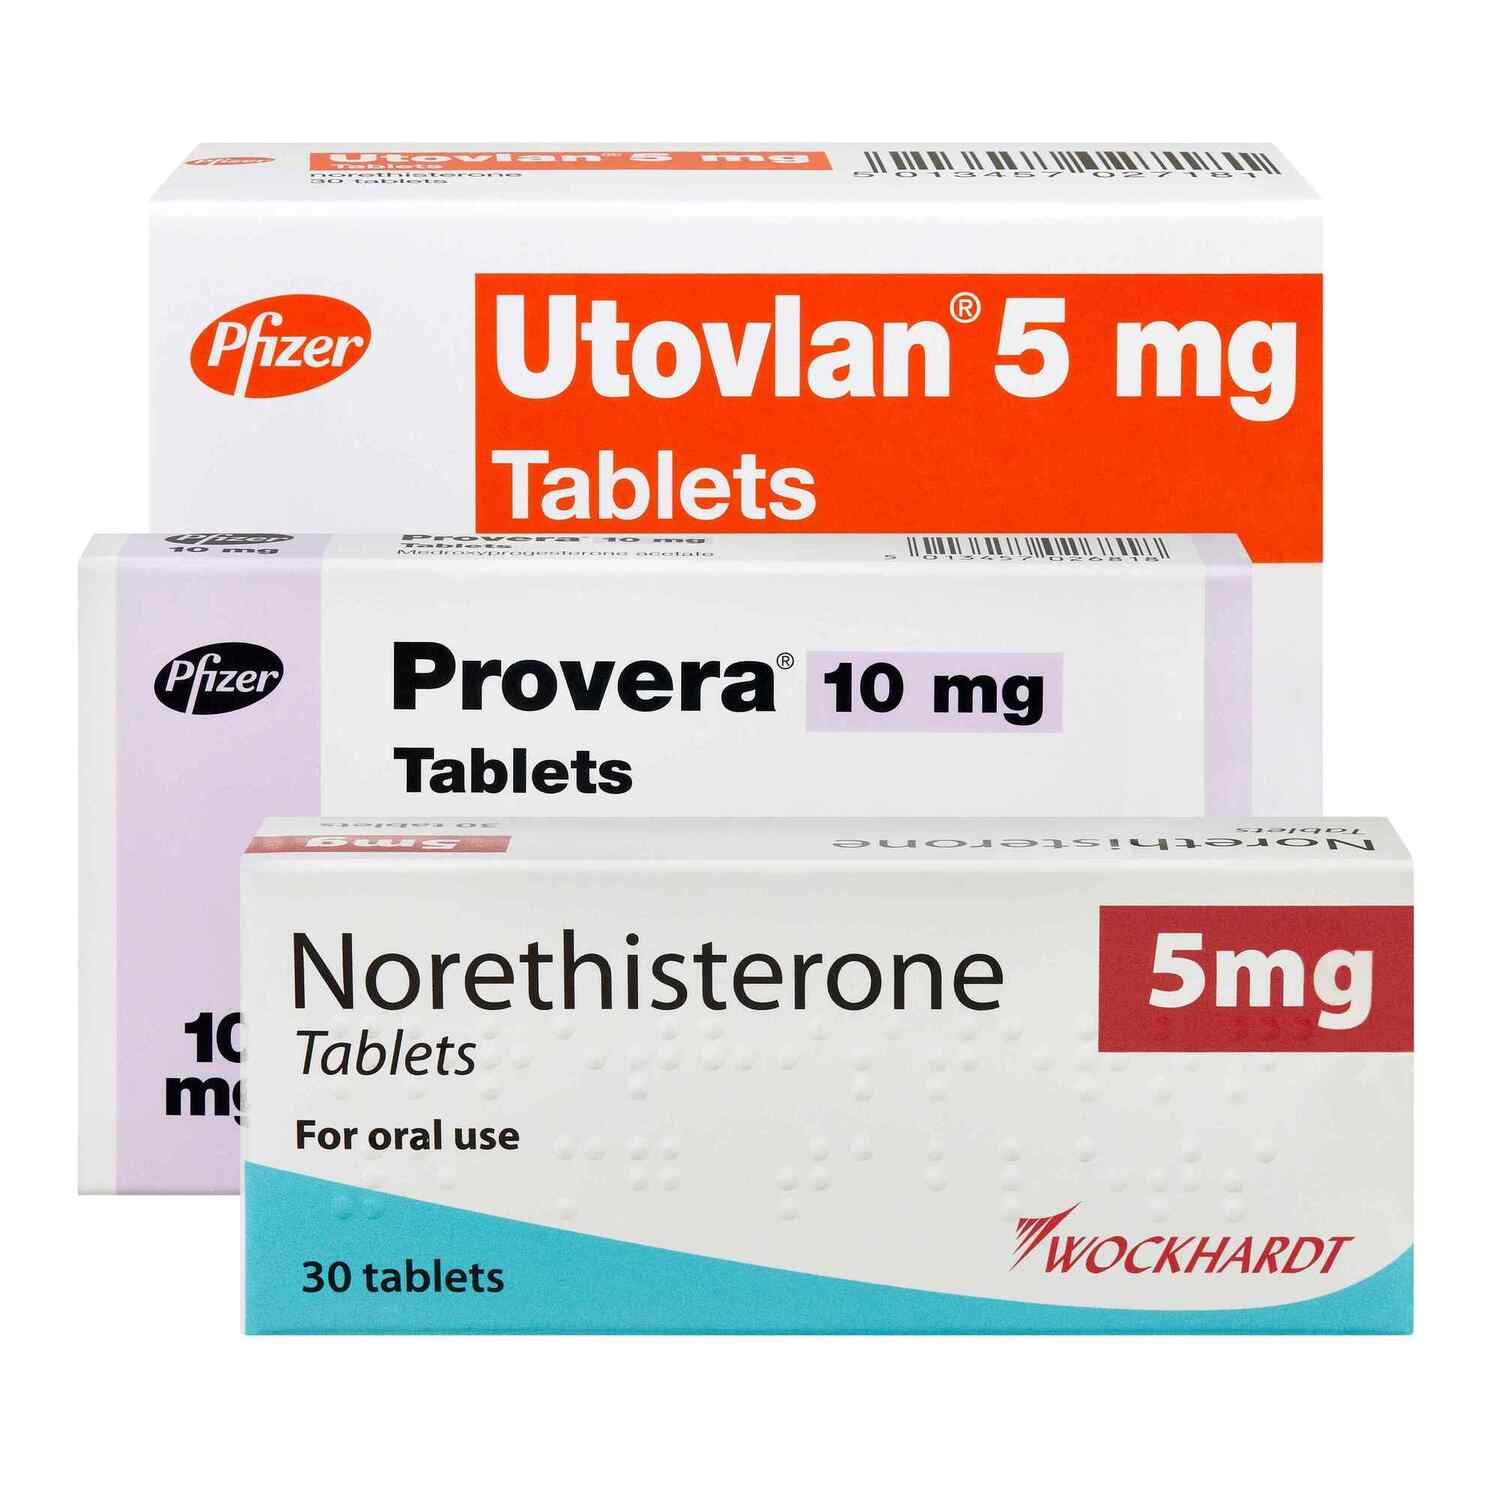 Boxes of the period delay tablets Utovlan, Provera, and Norethisterone